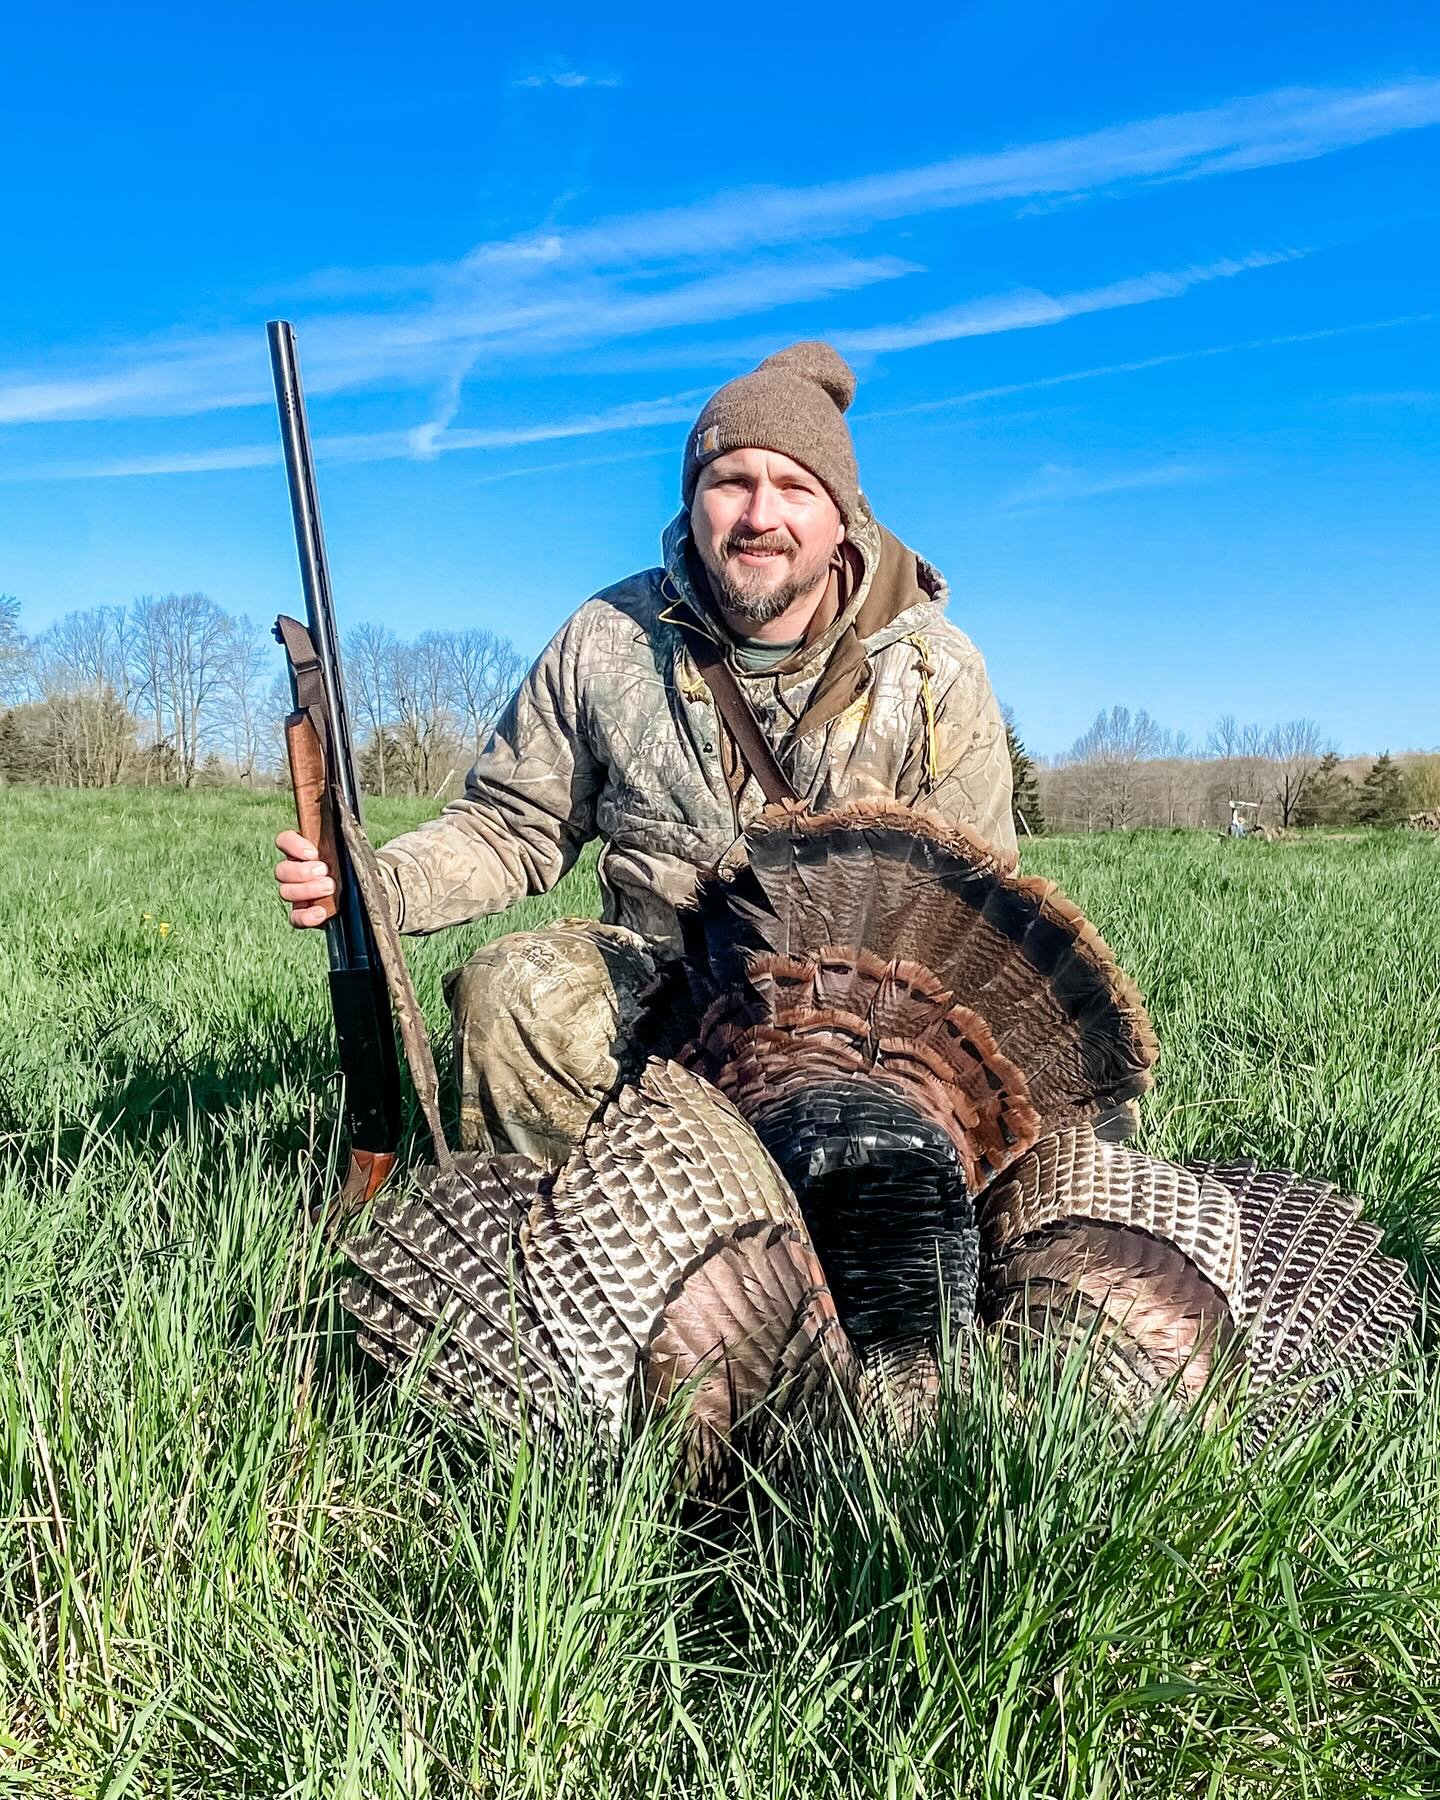 Spring turkey hunting success!! 🦃
&hellip;
Two mornings of hunting and weeks of patterning the flock of turkeys that live around our farm, and Dan got this dandy of a tom! 👏
&hellip;
He was BIG and mature - sporting a very long beard and some huge 